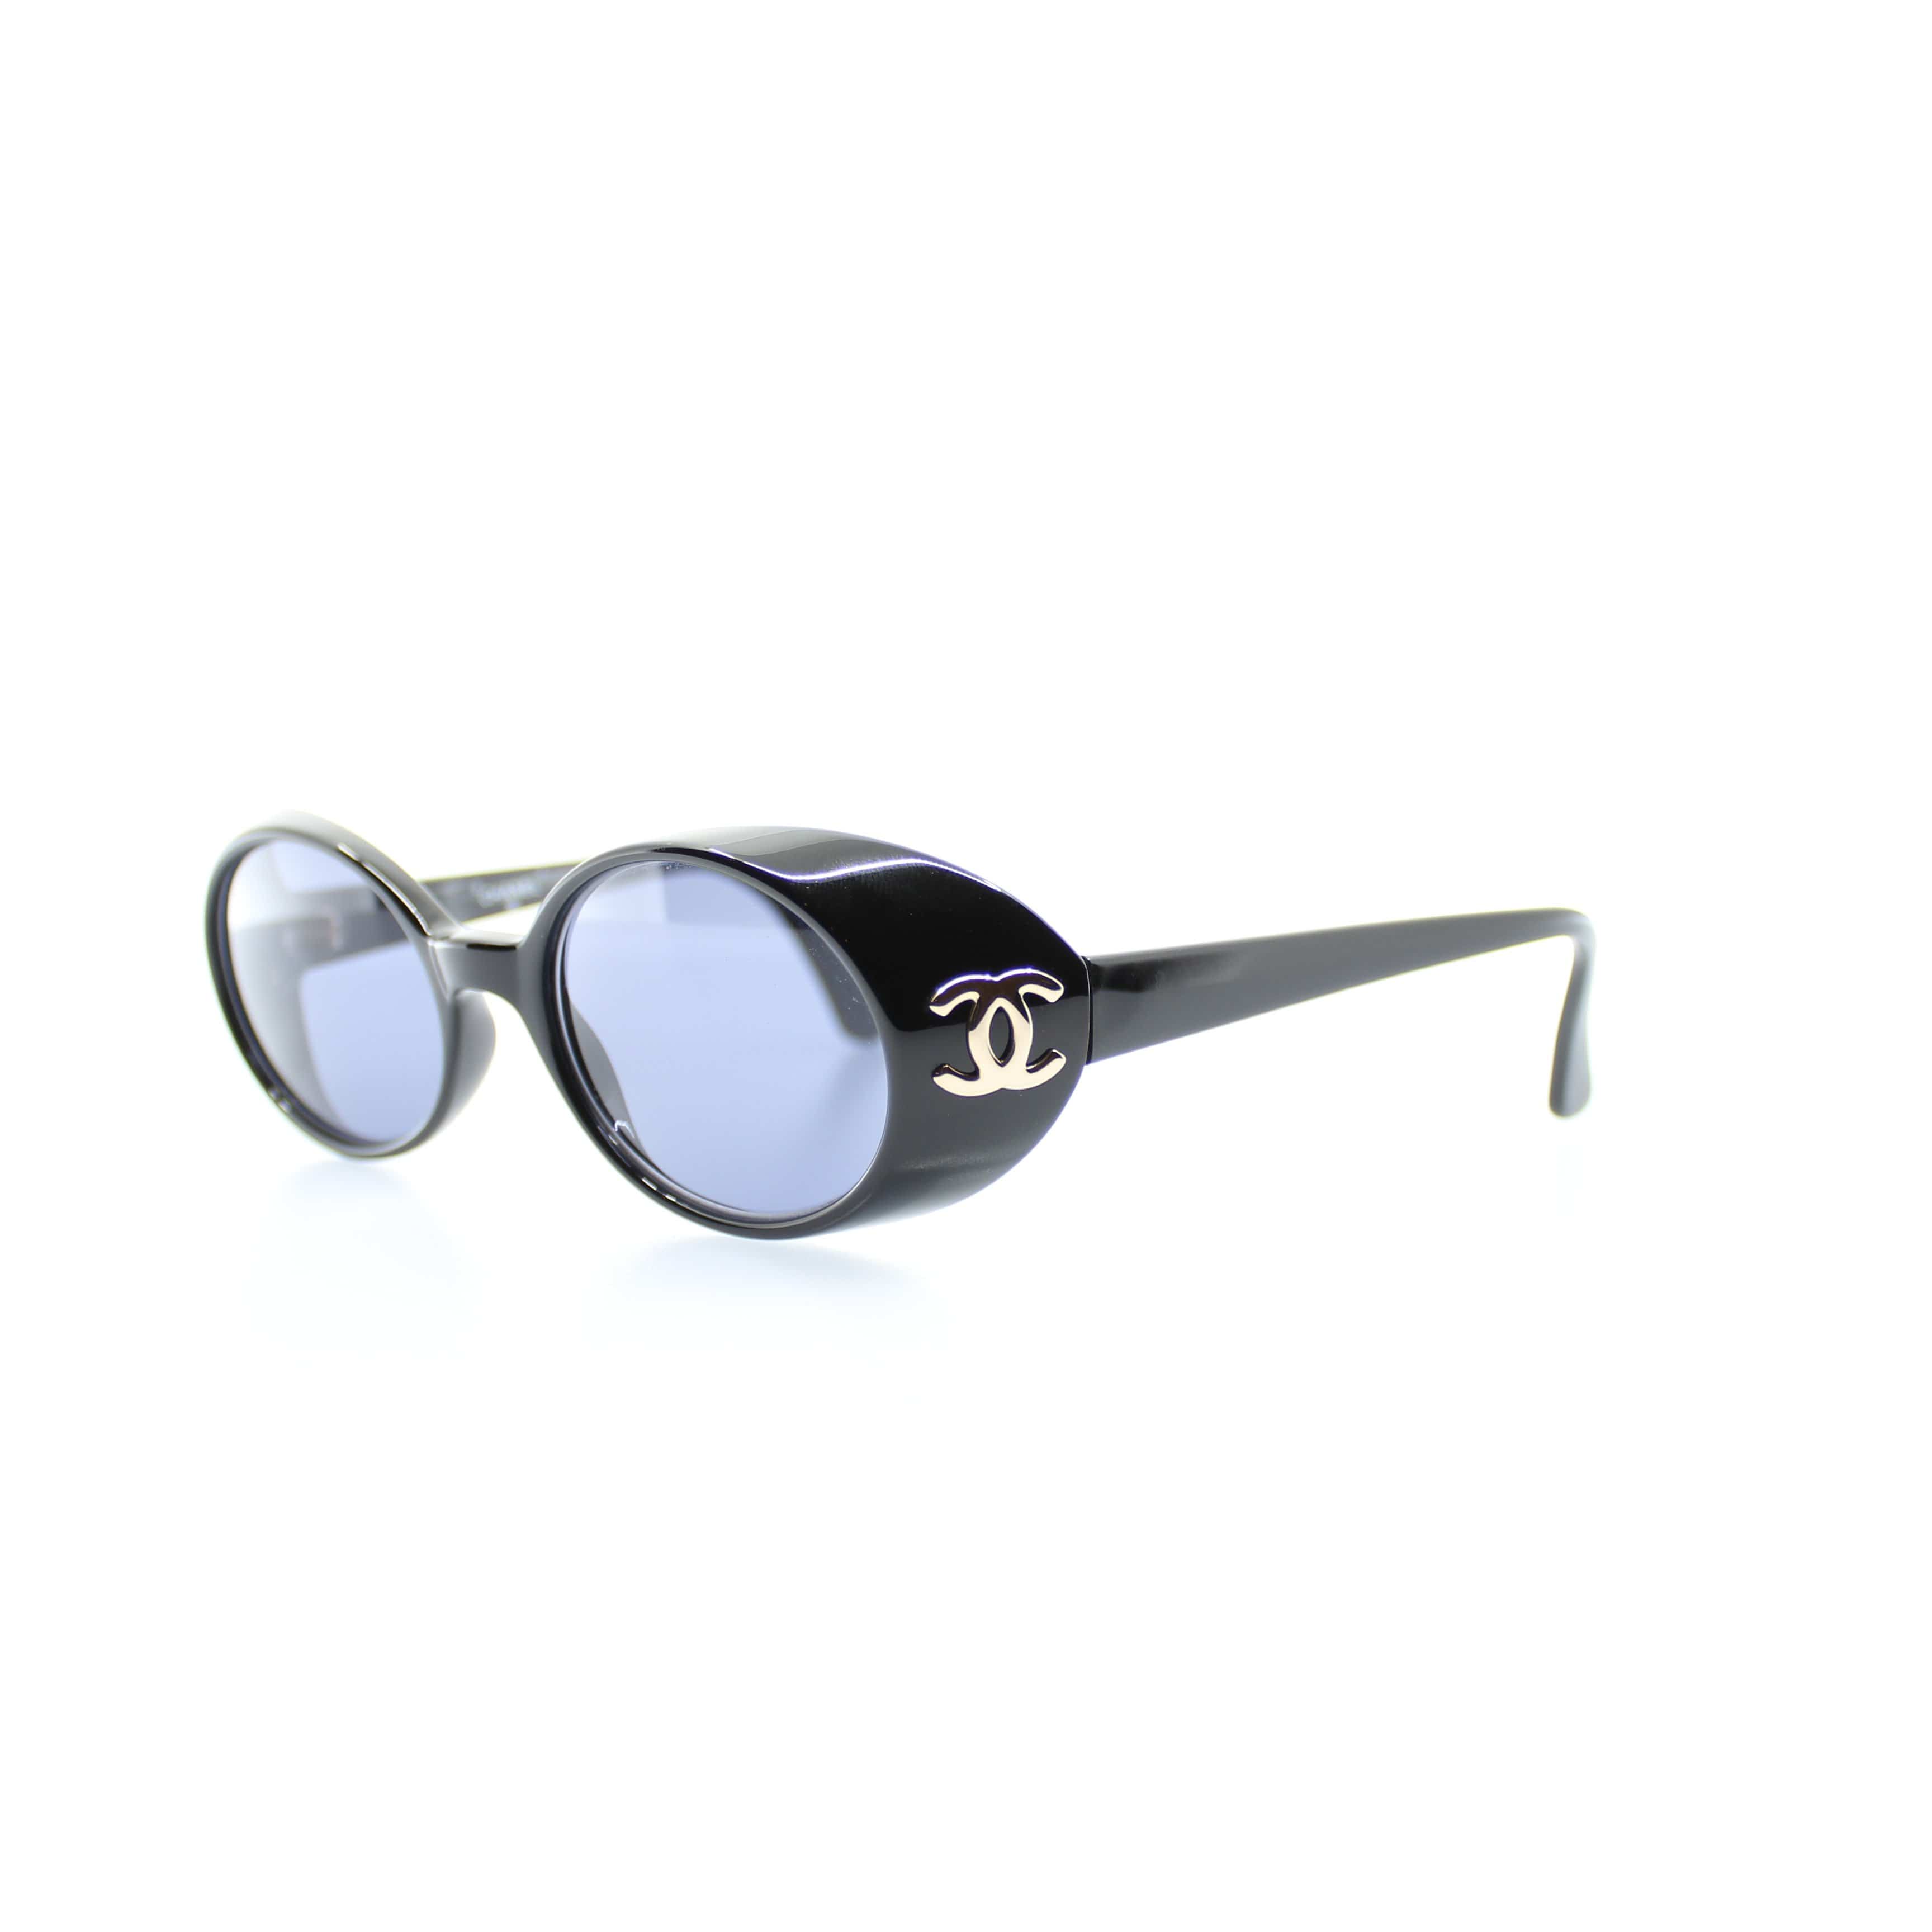 CHANEL sunglasses 01452 94305｜Product Code：2106800299809｜BRAND OFF Online  Store